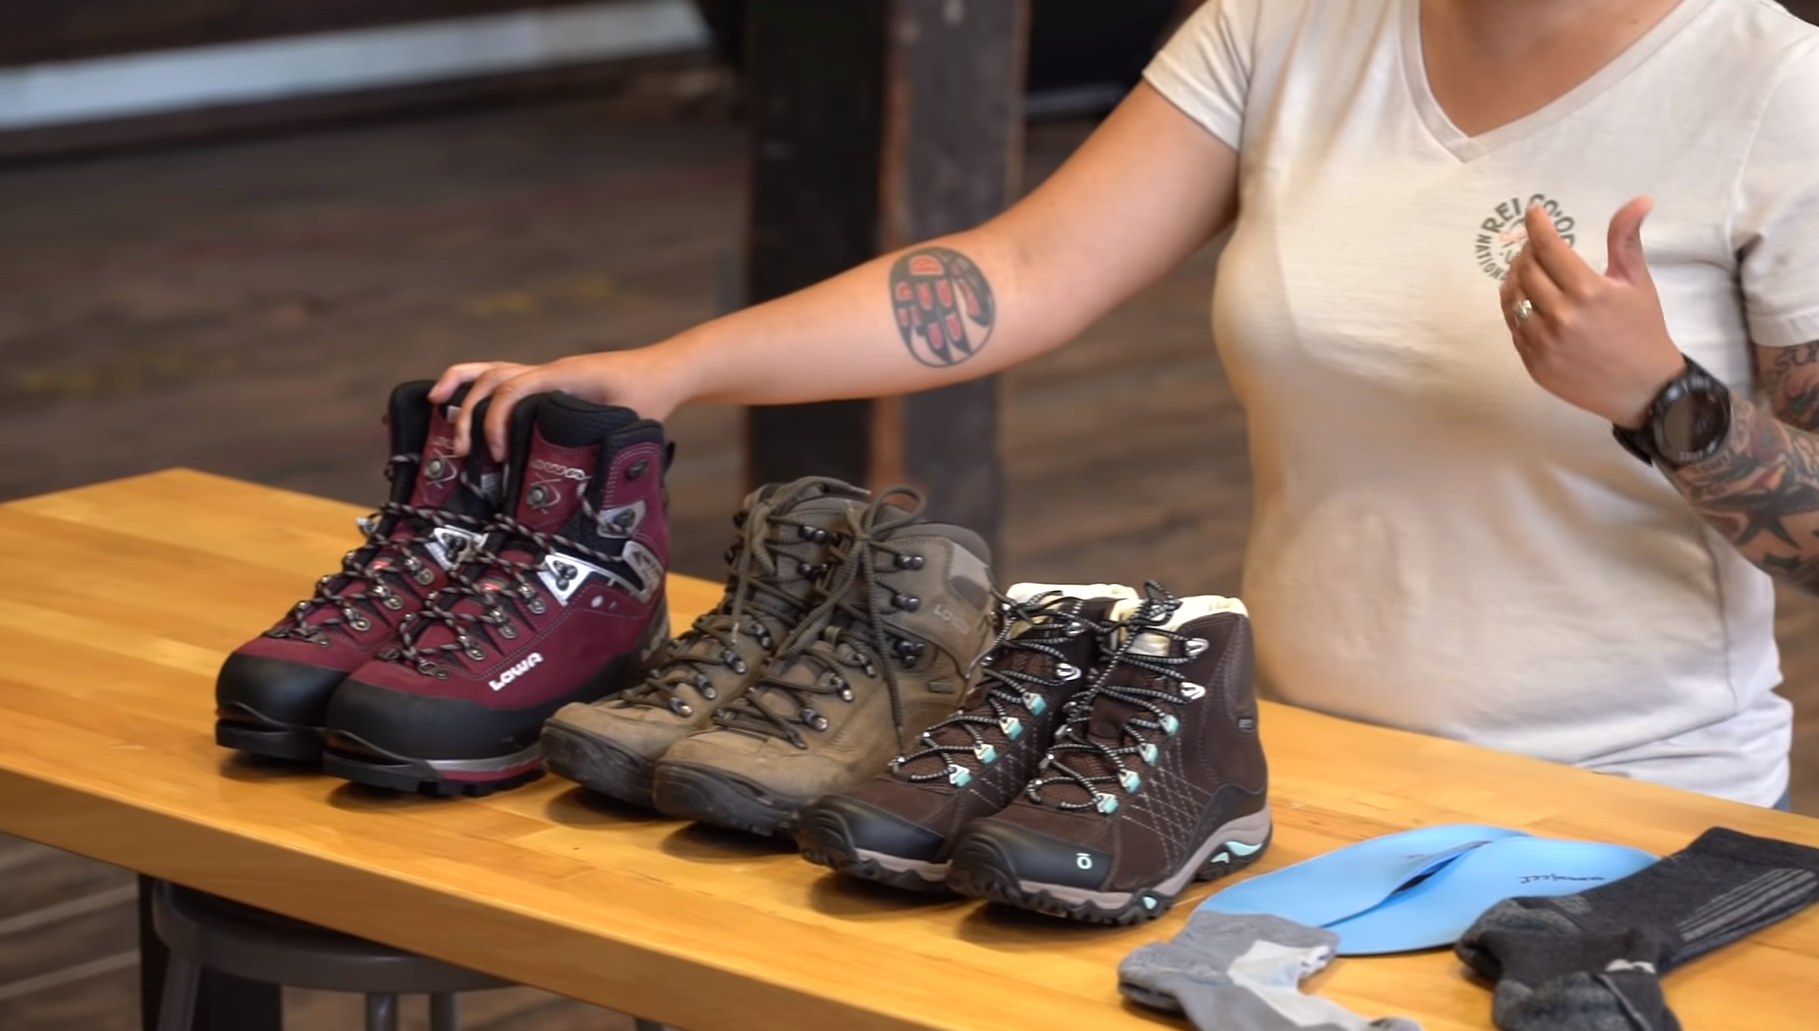 How to Stretch the Toe Box of Hiking Boots